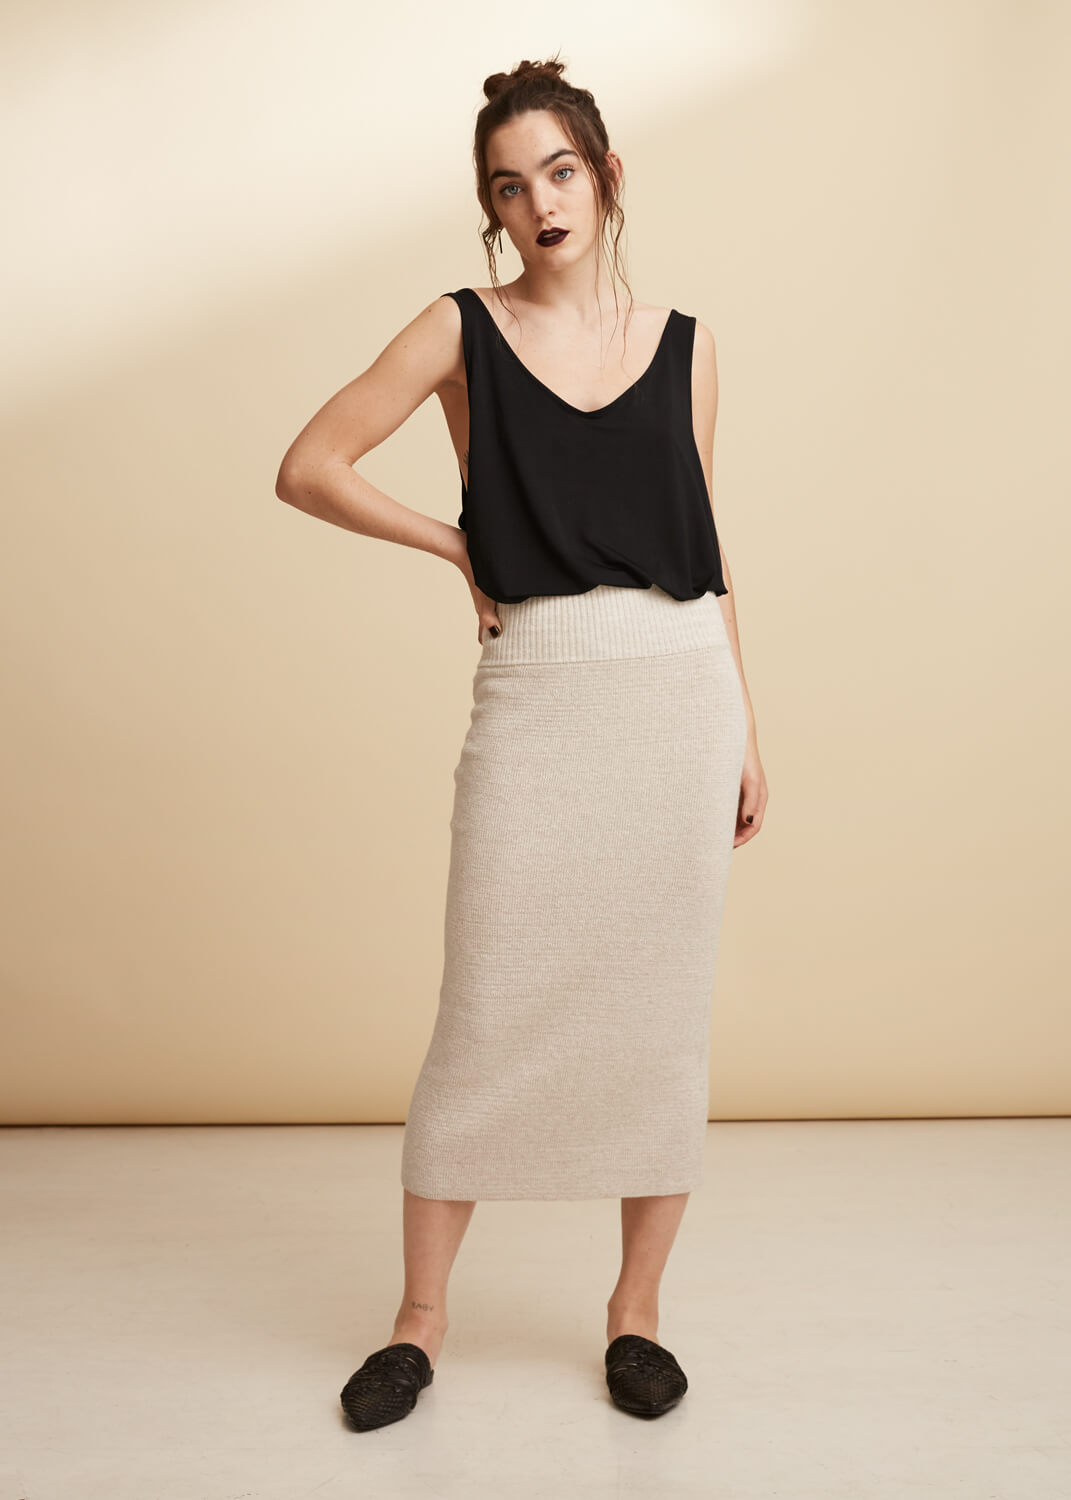 ORES Recycled yarn Skirt- Swedish sustainable fashion with perfect fit